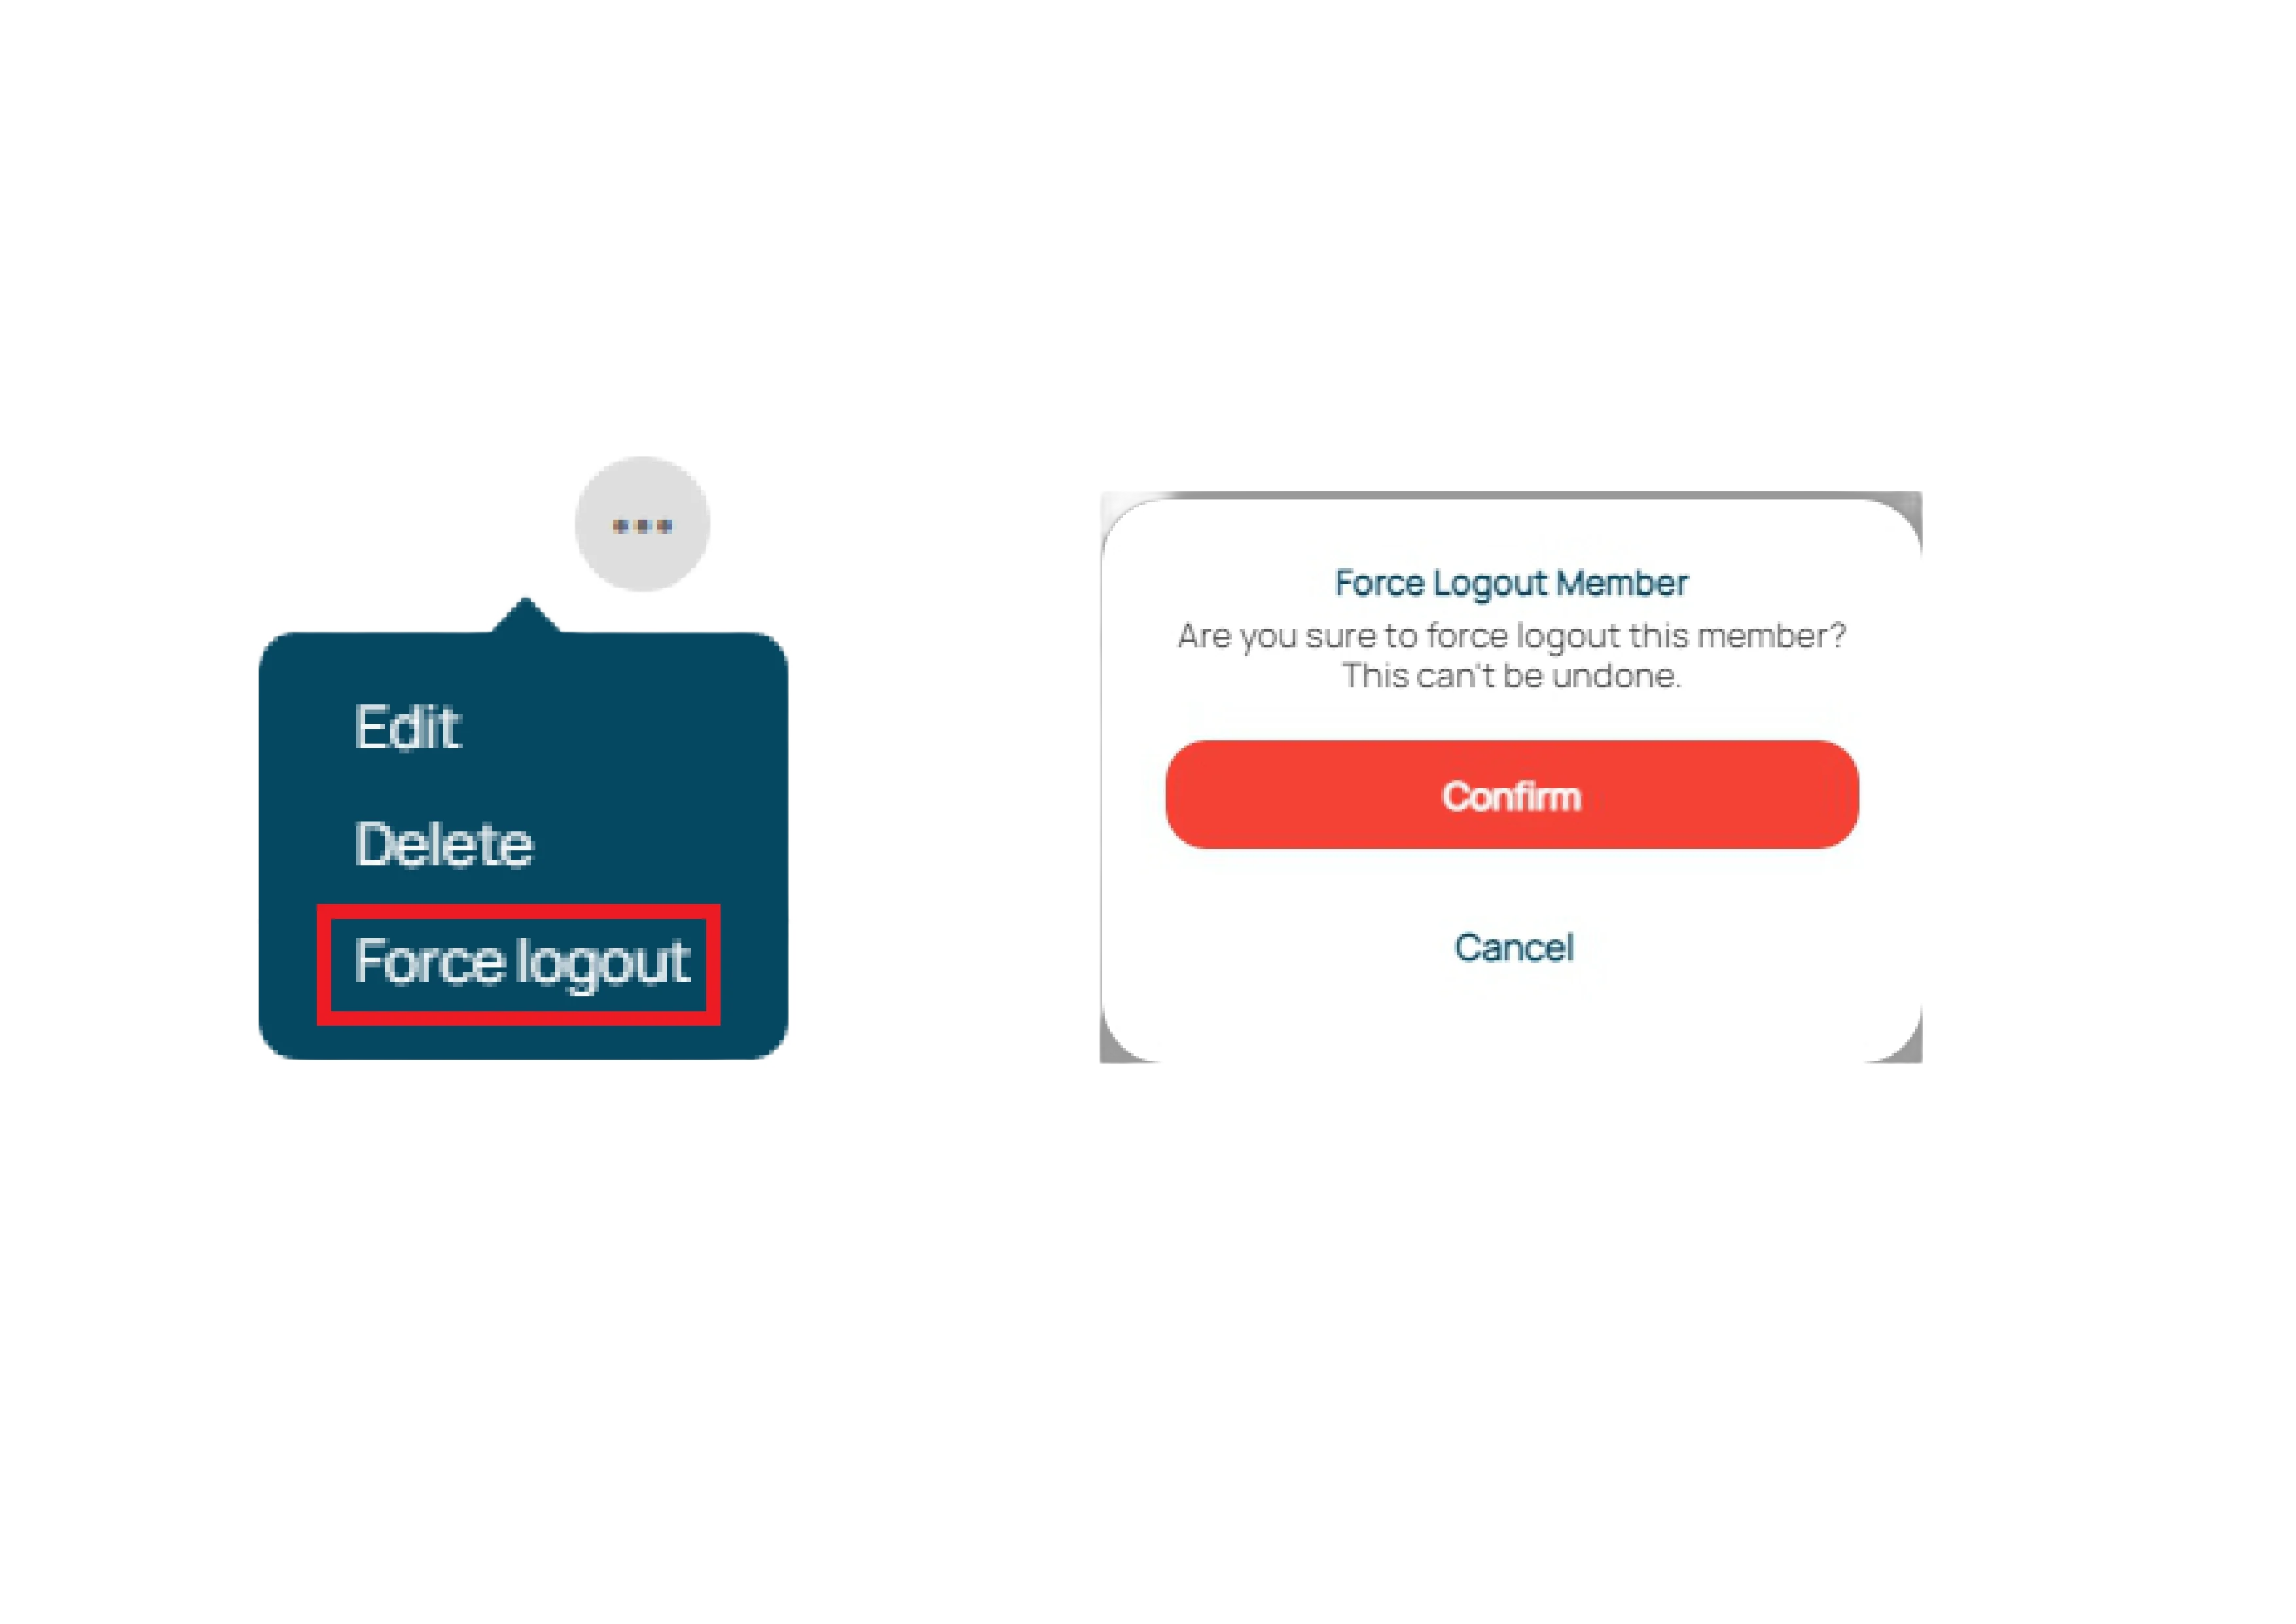 Select the Force Logout option